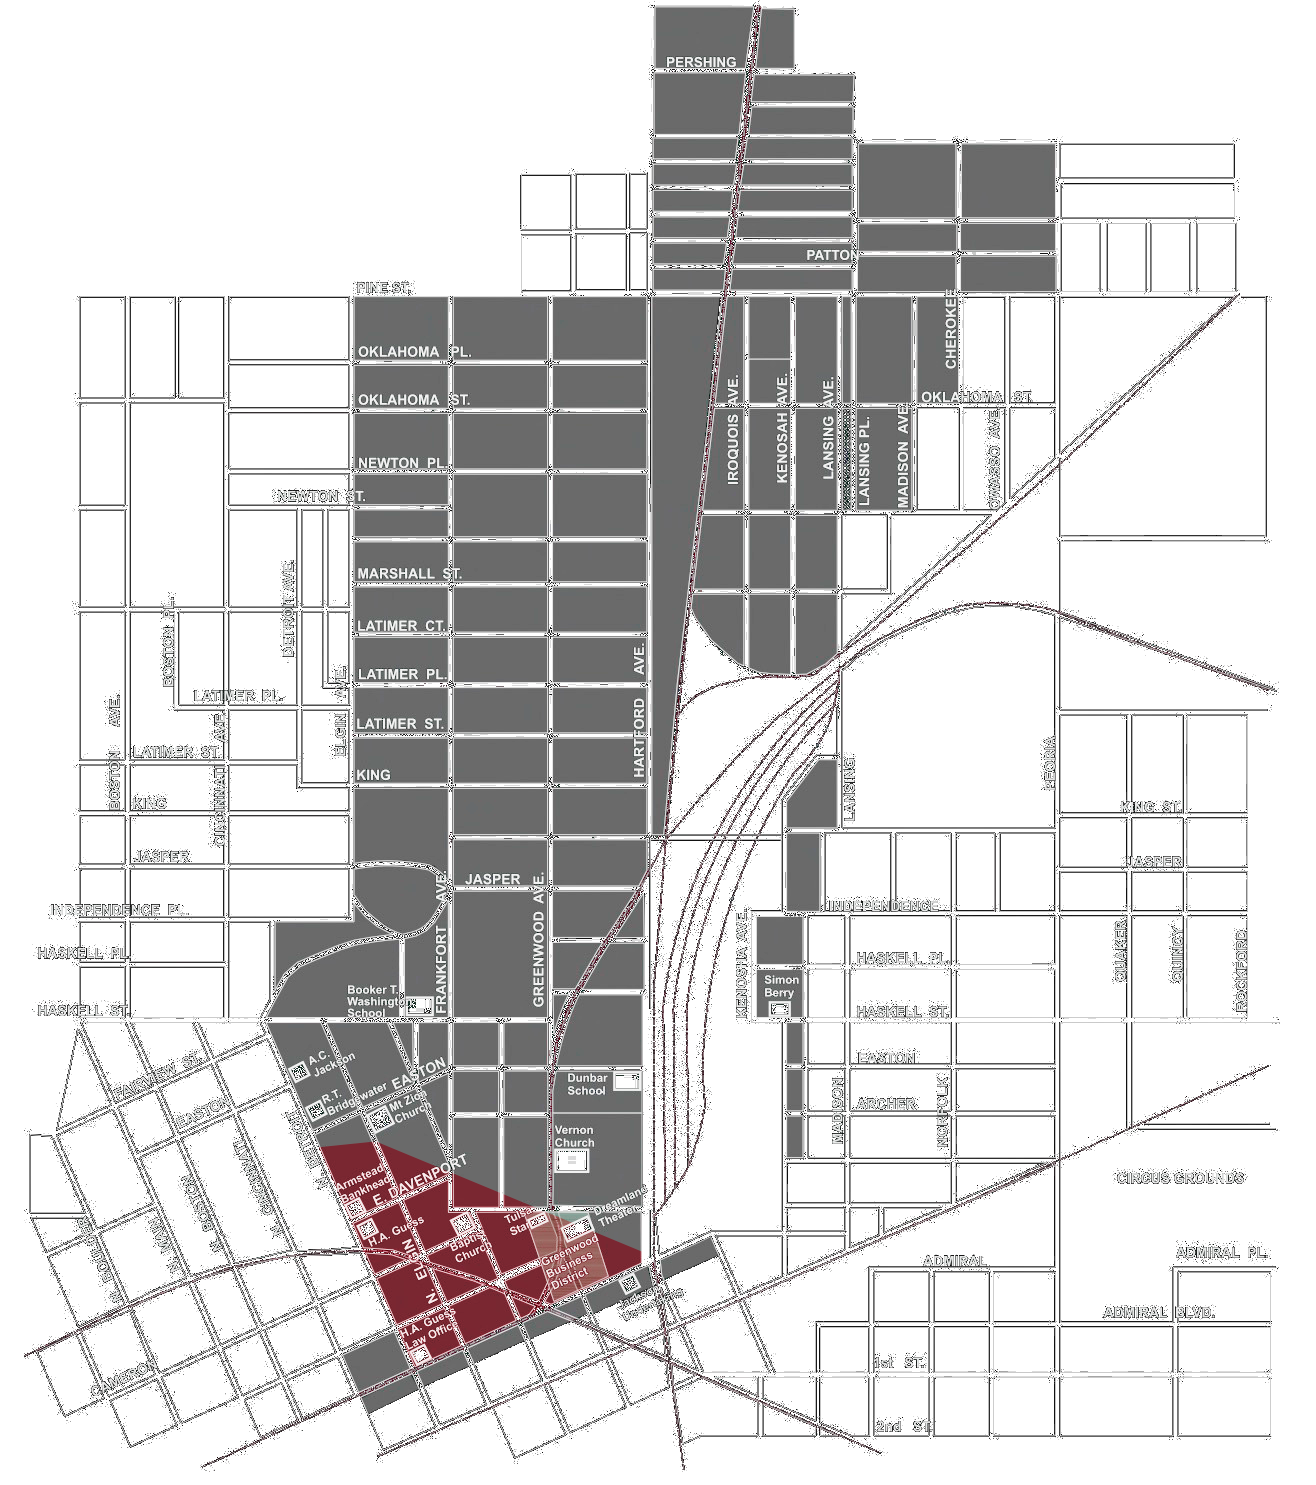 This image shows a map of the Greenwood neighborhood district. It highlights in gray the expanse of the neighborhood during the height of Black Wallstreet in 1921. It highlights in maroon the much smaller area that the neighborhood covered in 2020, showing the extent of property destruction during the events of the 1921 massacre.